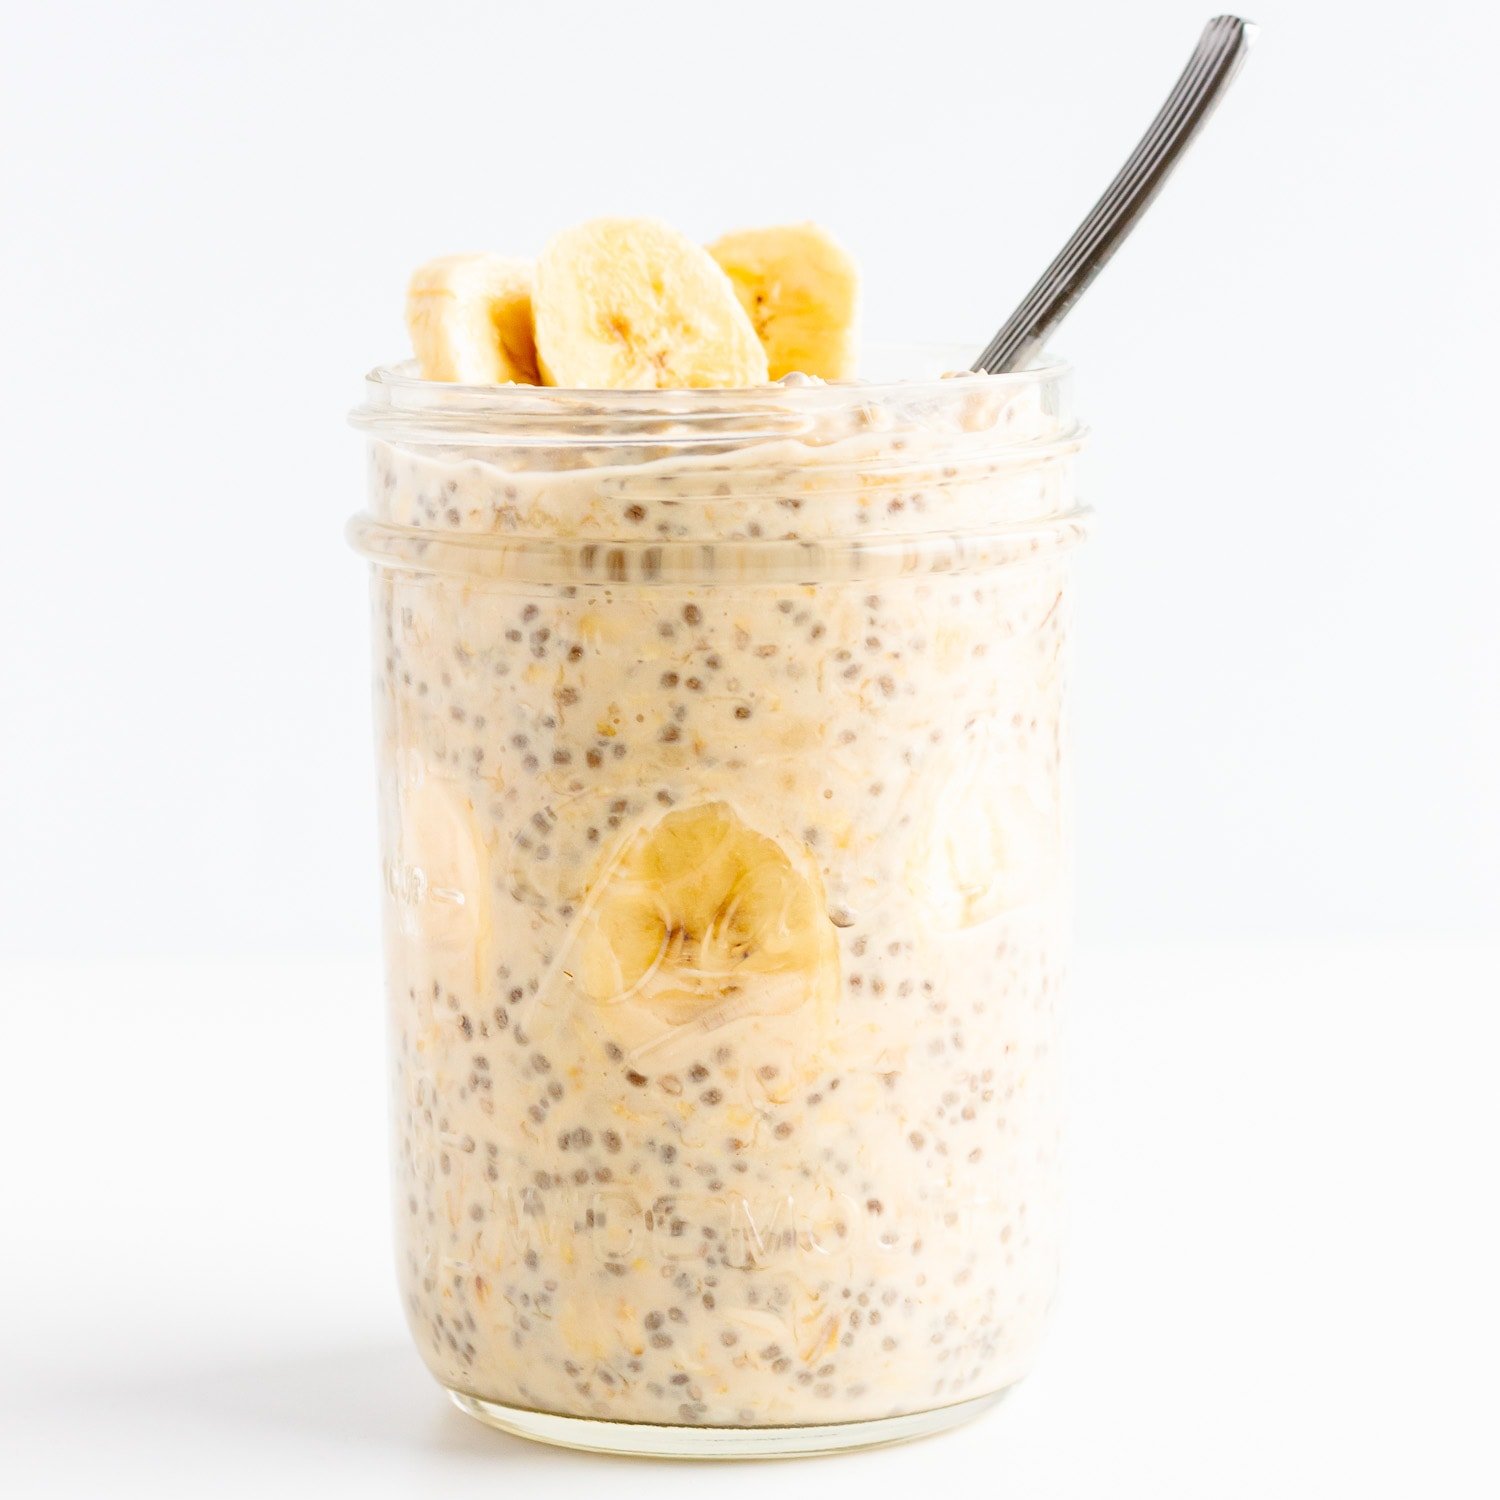 A mason jar of banana overnight oats garnished with fresh banana slices and a spoon sticking out.